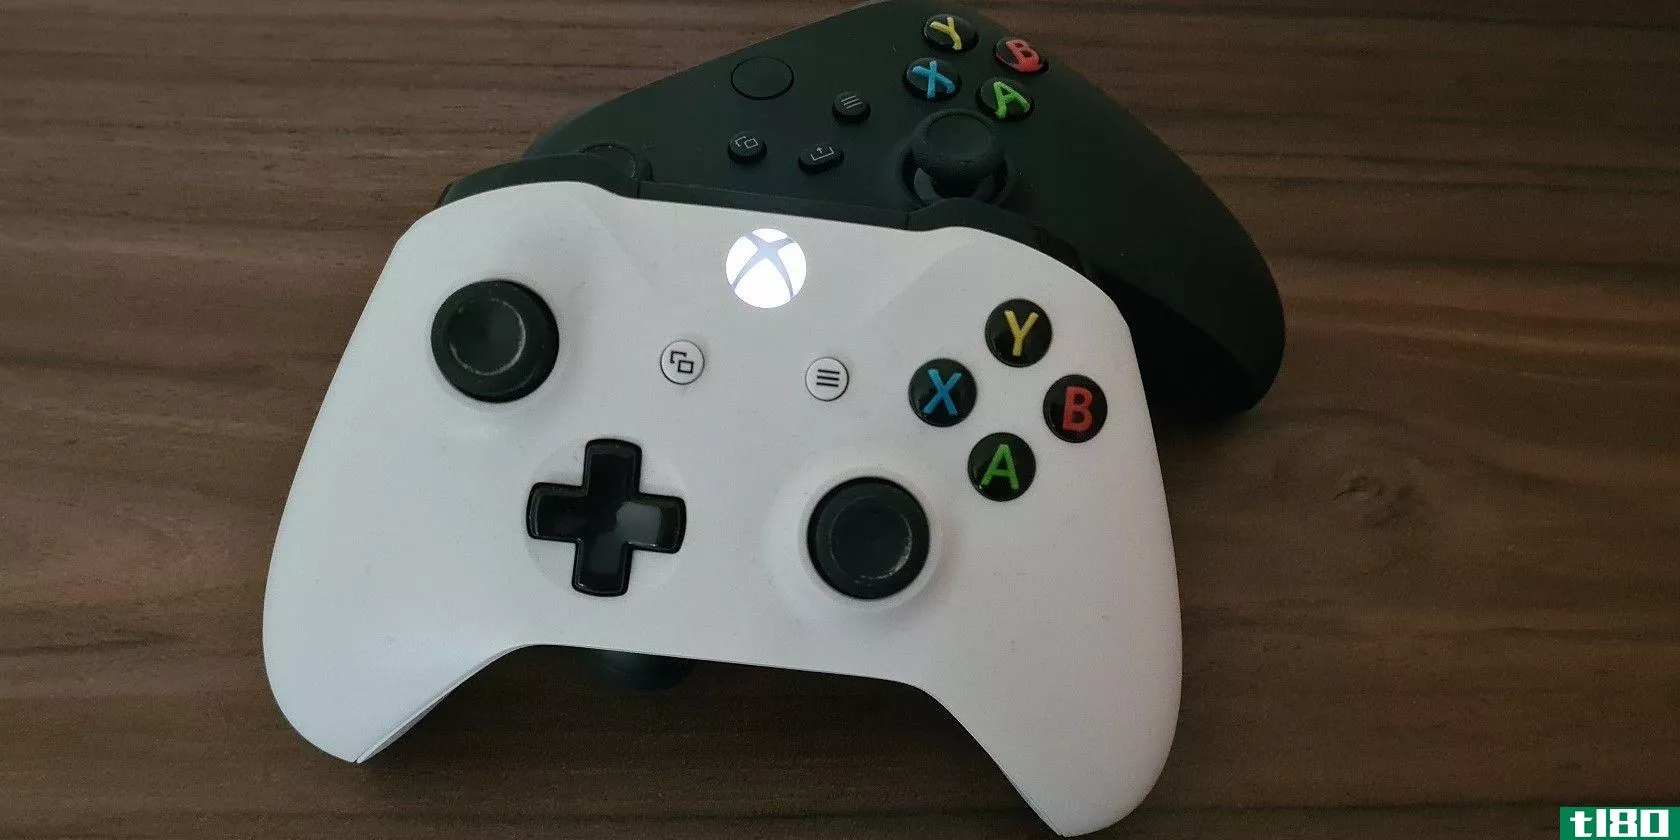 Xbox One Pad black and white variants